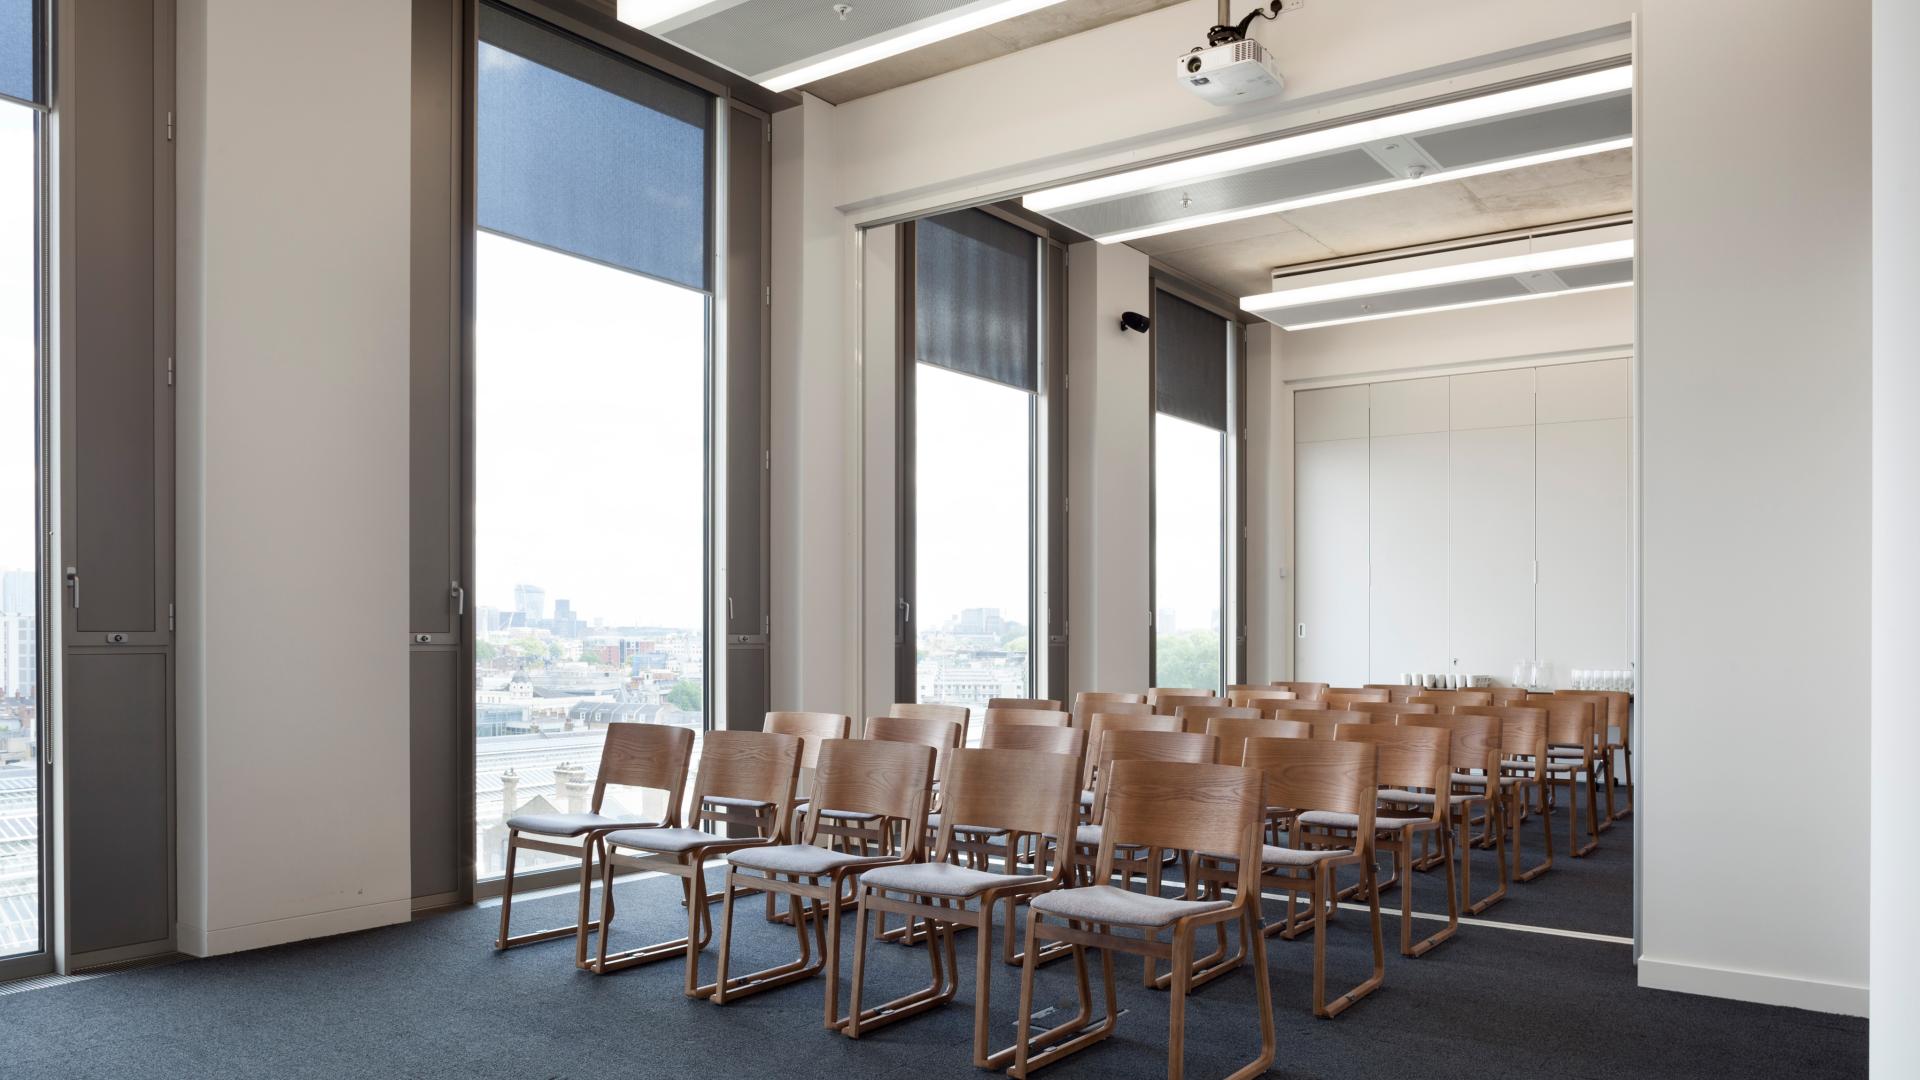 Small Conference Venues for Hire in London